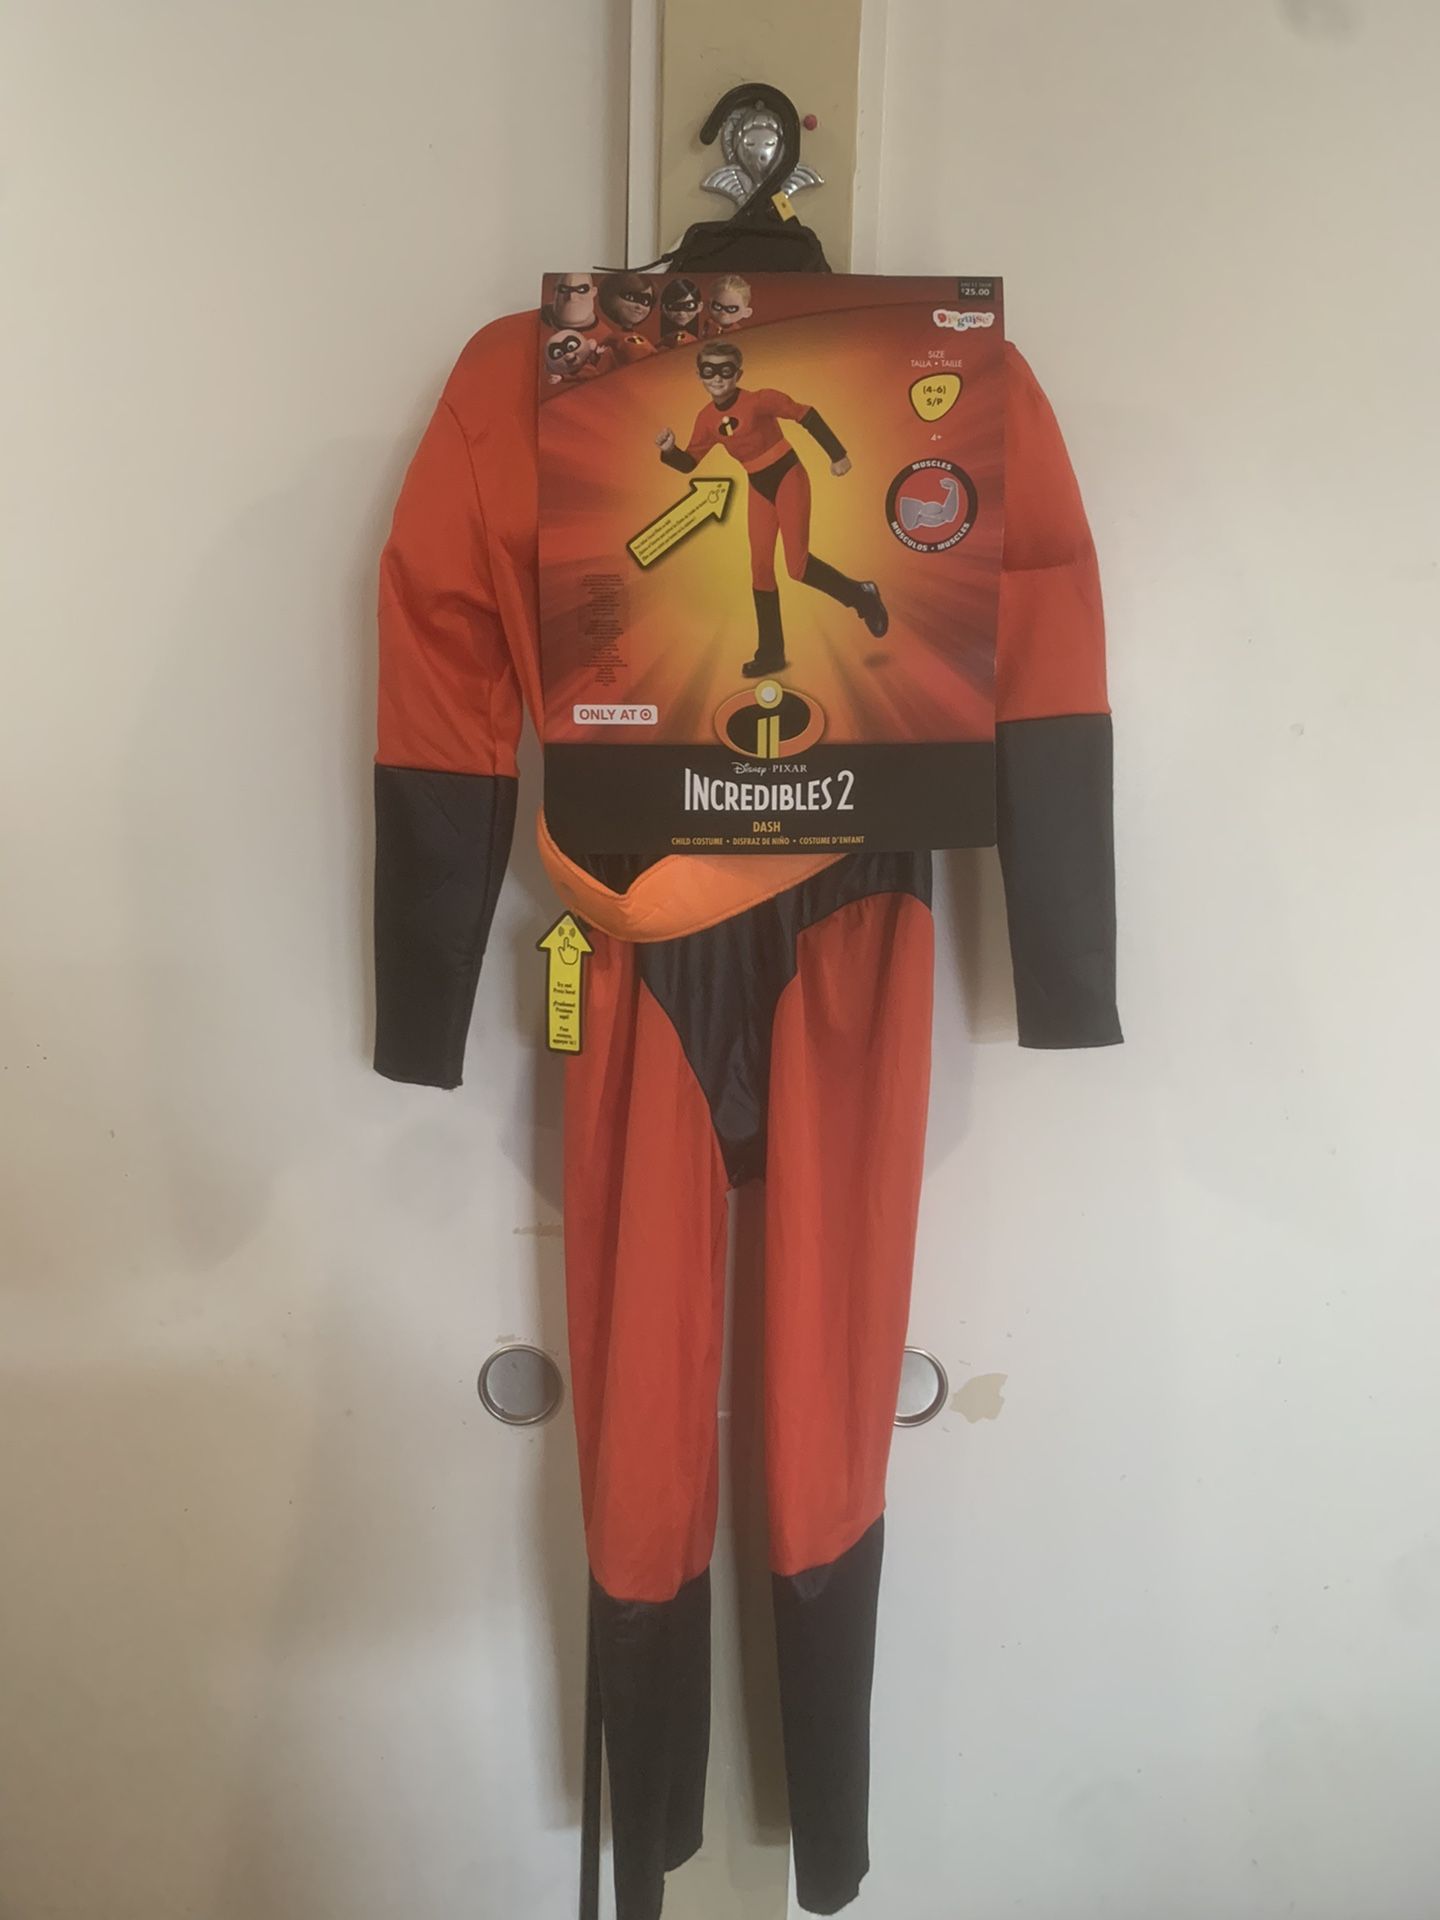 Incredibles Costume. Brand new